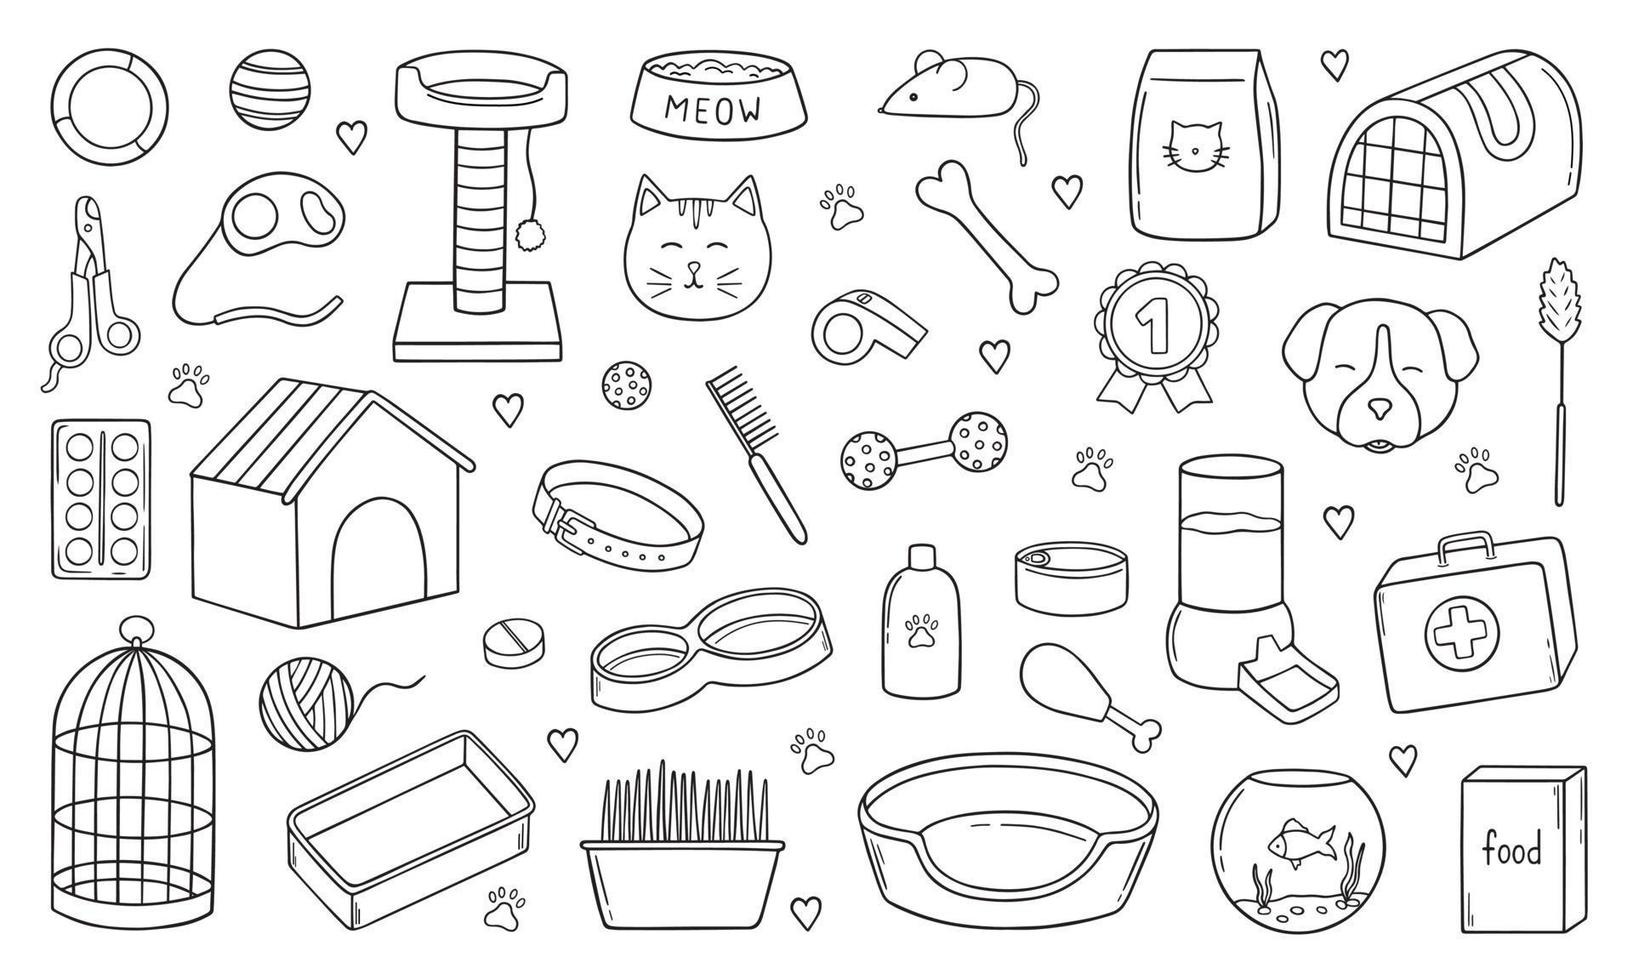 Hand drawn set of Pets shop and veterinary doodle. Supplies and accessories for dogs and cats in sketch style. Bowl, toys, collar, food, kennel. Vector illustration isolated on white background.